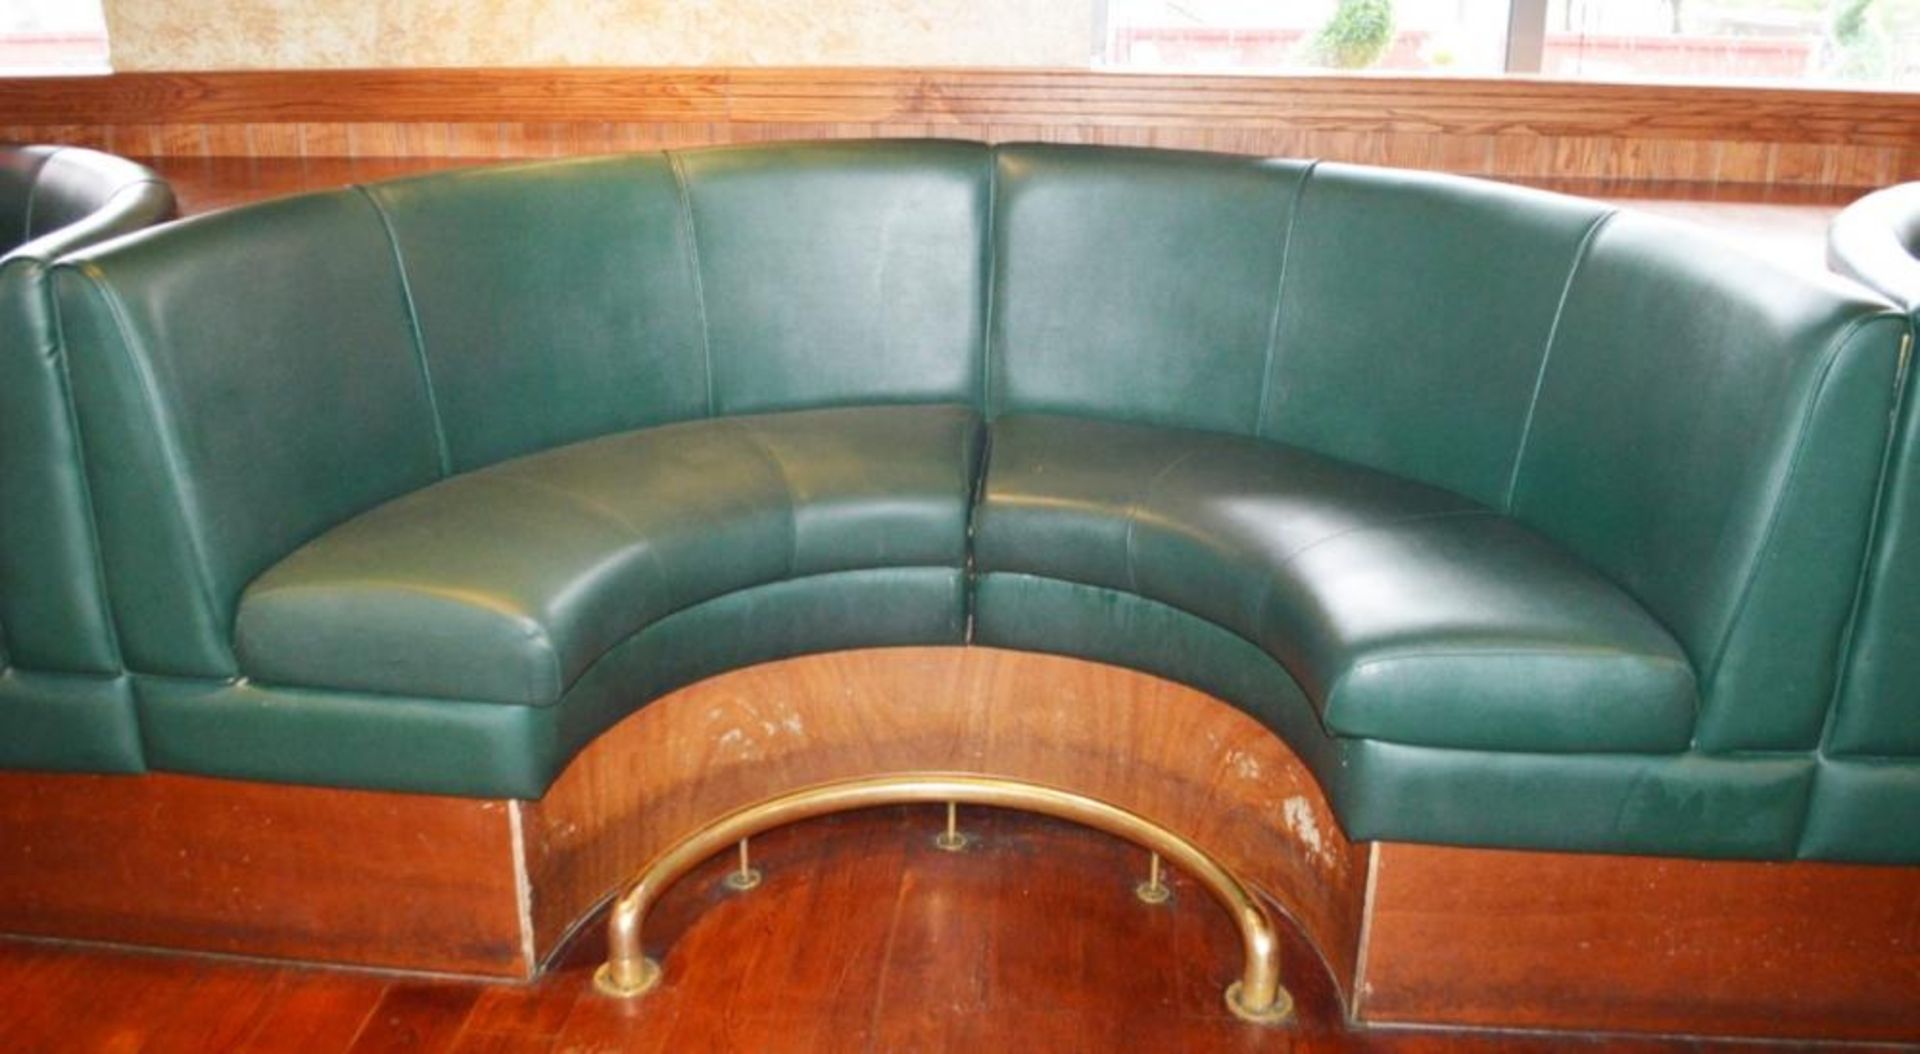 2 x Contemporary U Seating Booths With Green Faux Leather Upholstery and Brass Foot Rests - H105 x W - Image 2 of 6